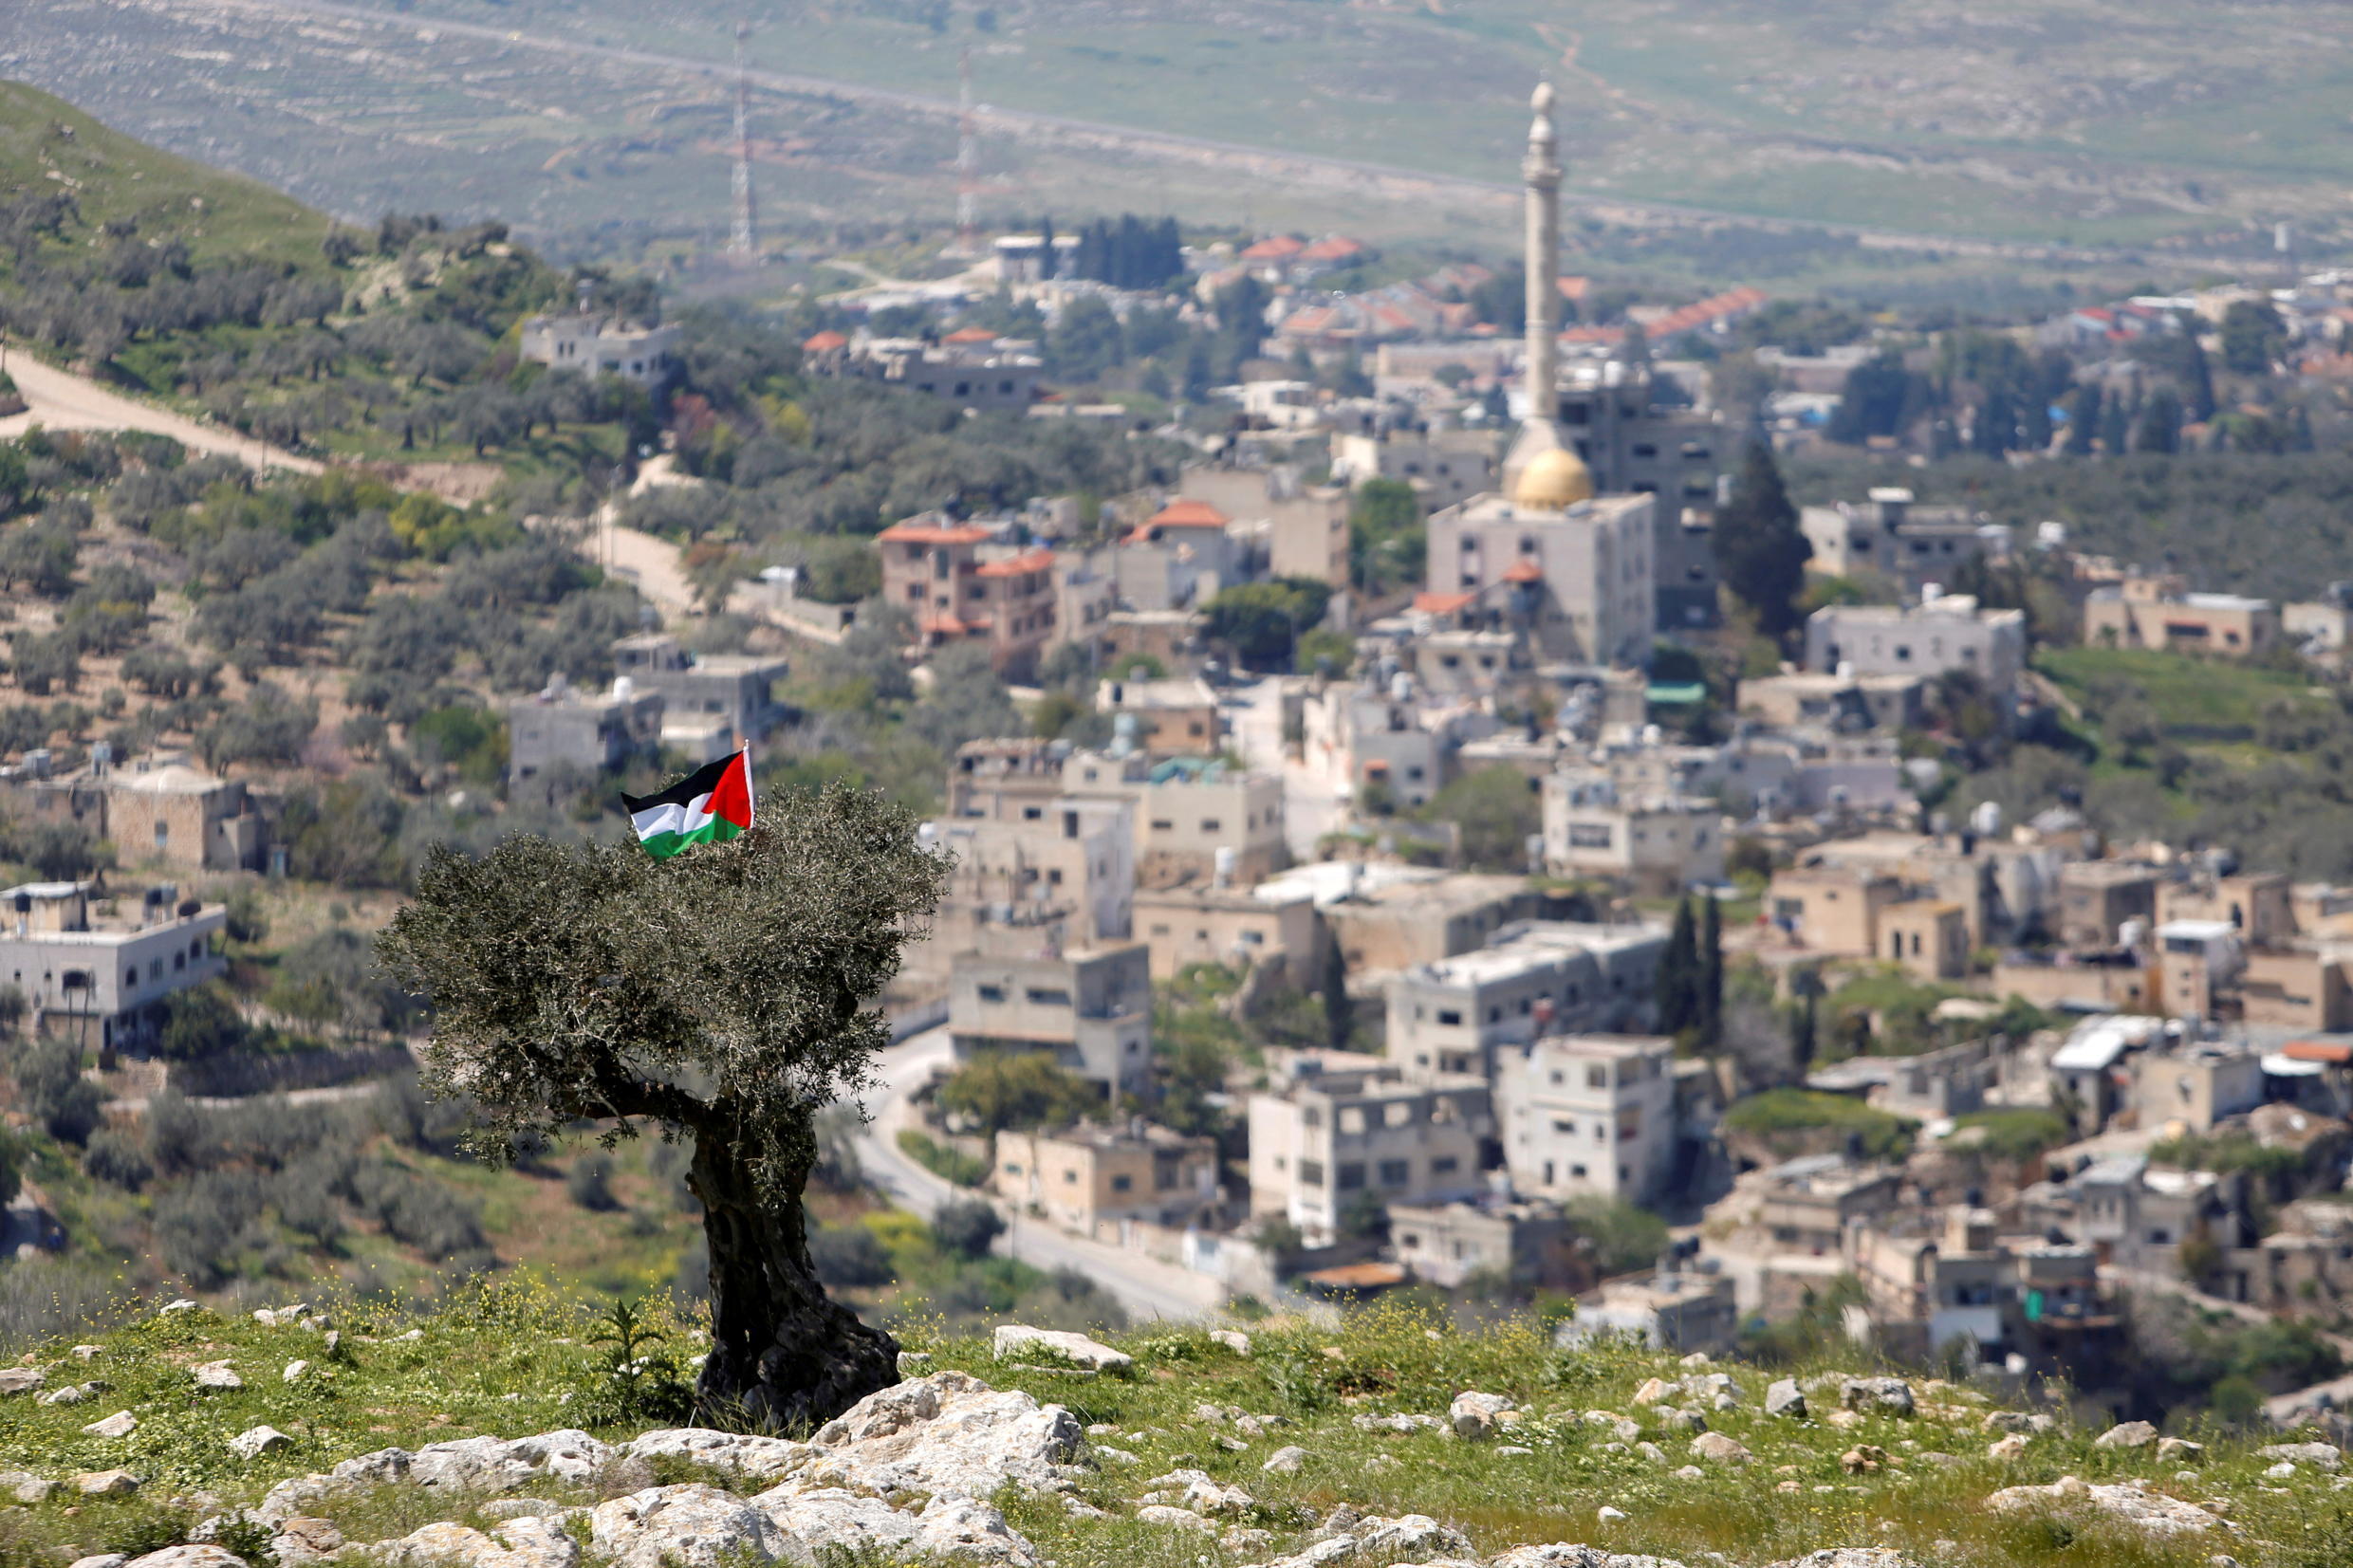 A Palestinian flag hangs on a tree during a protest against Jewish settlements in An-Naqura village near Nablus in the Israeli-occupied West Bank, on March 29, 2021.